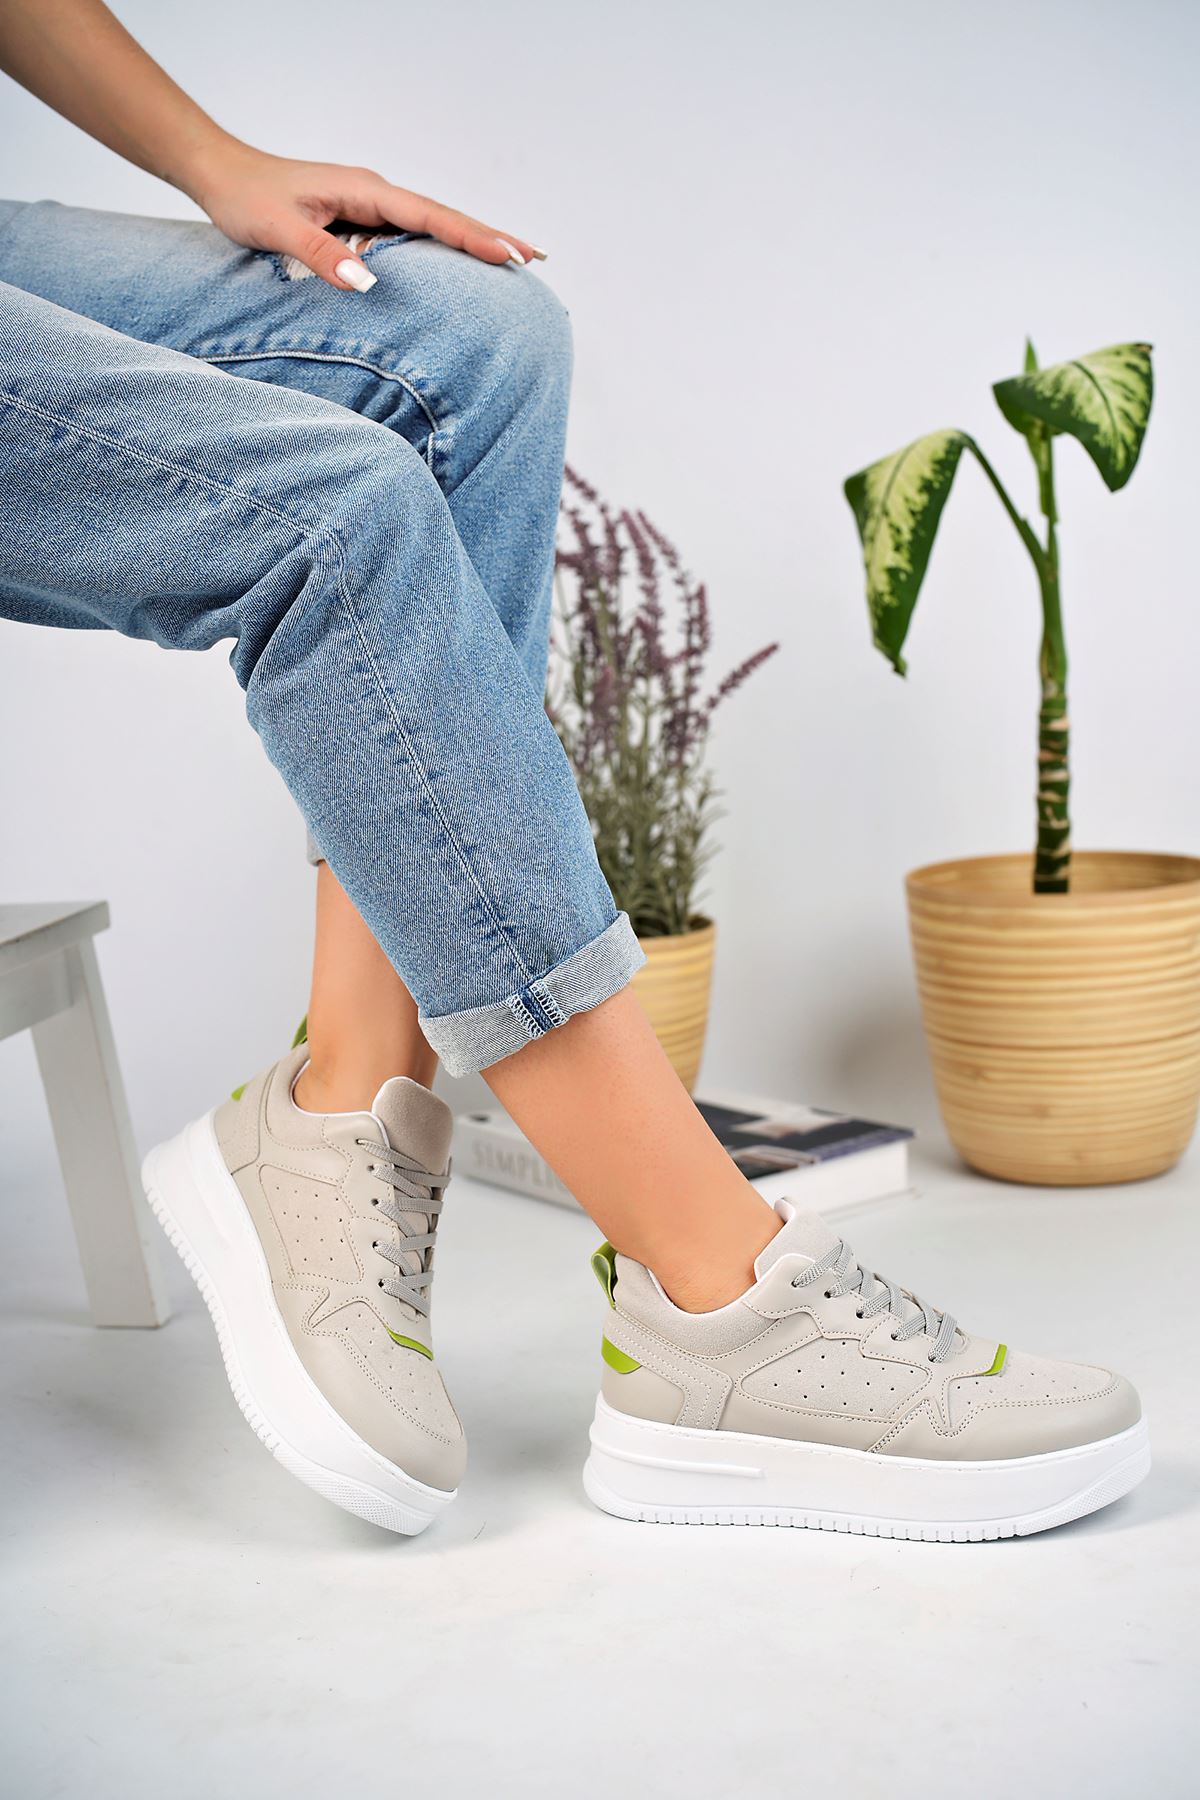 Gray Sneakers with Green Garnish